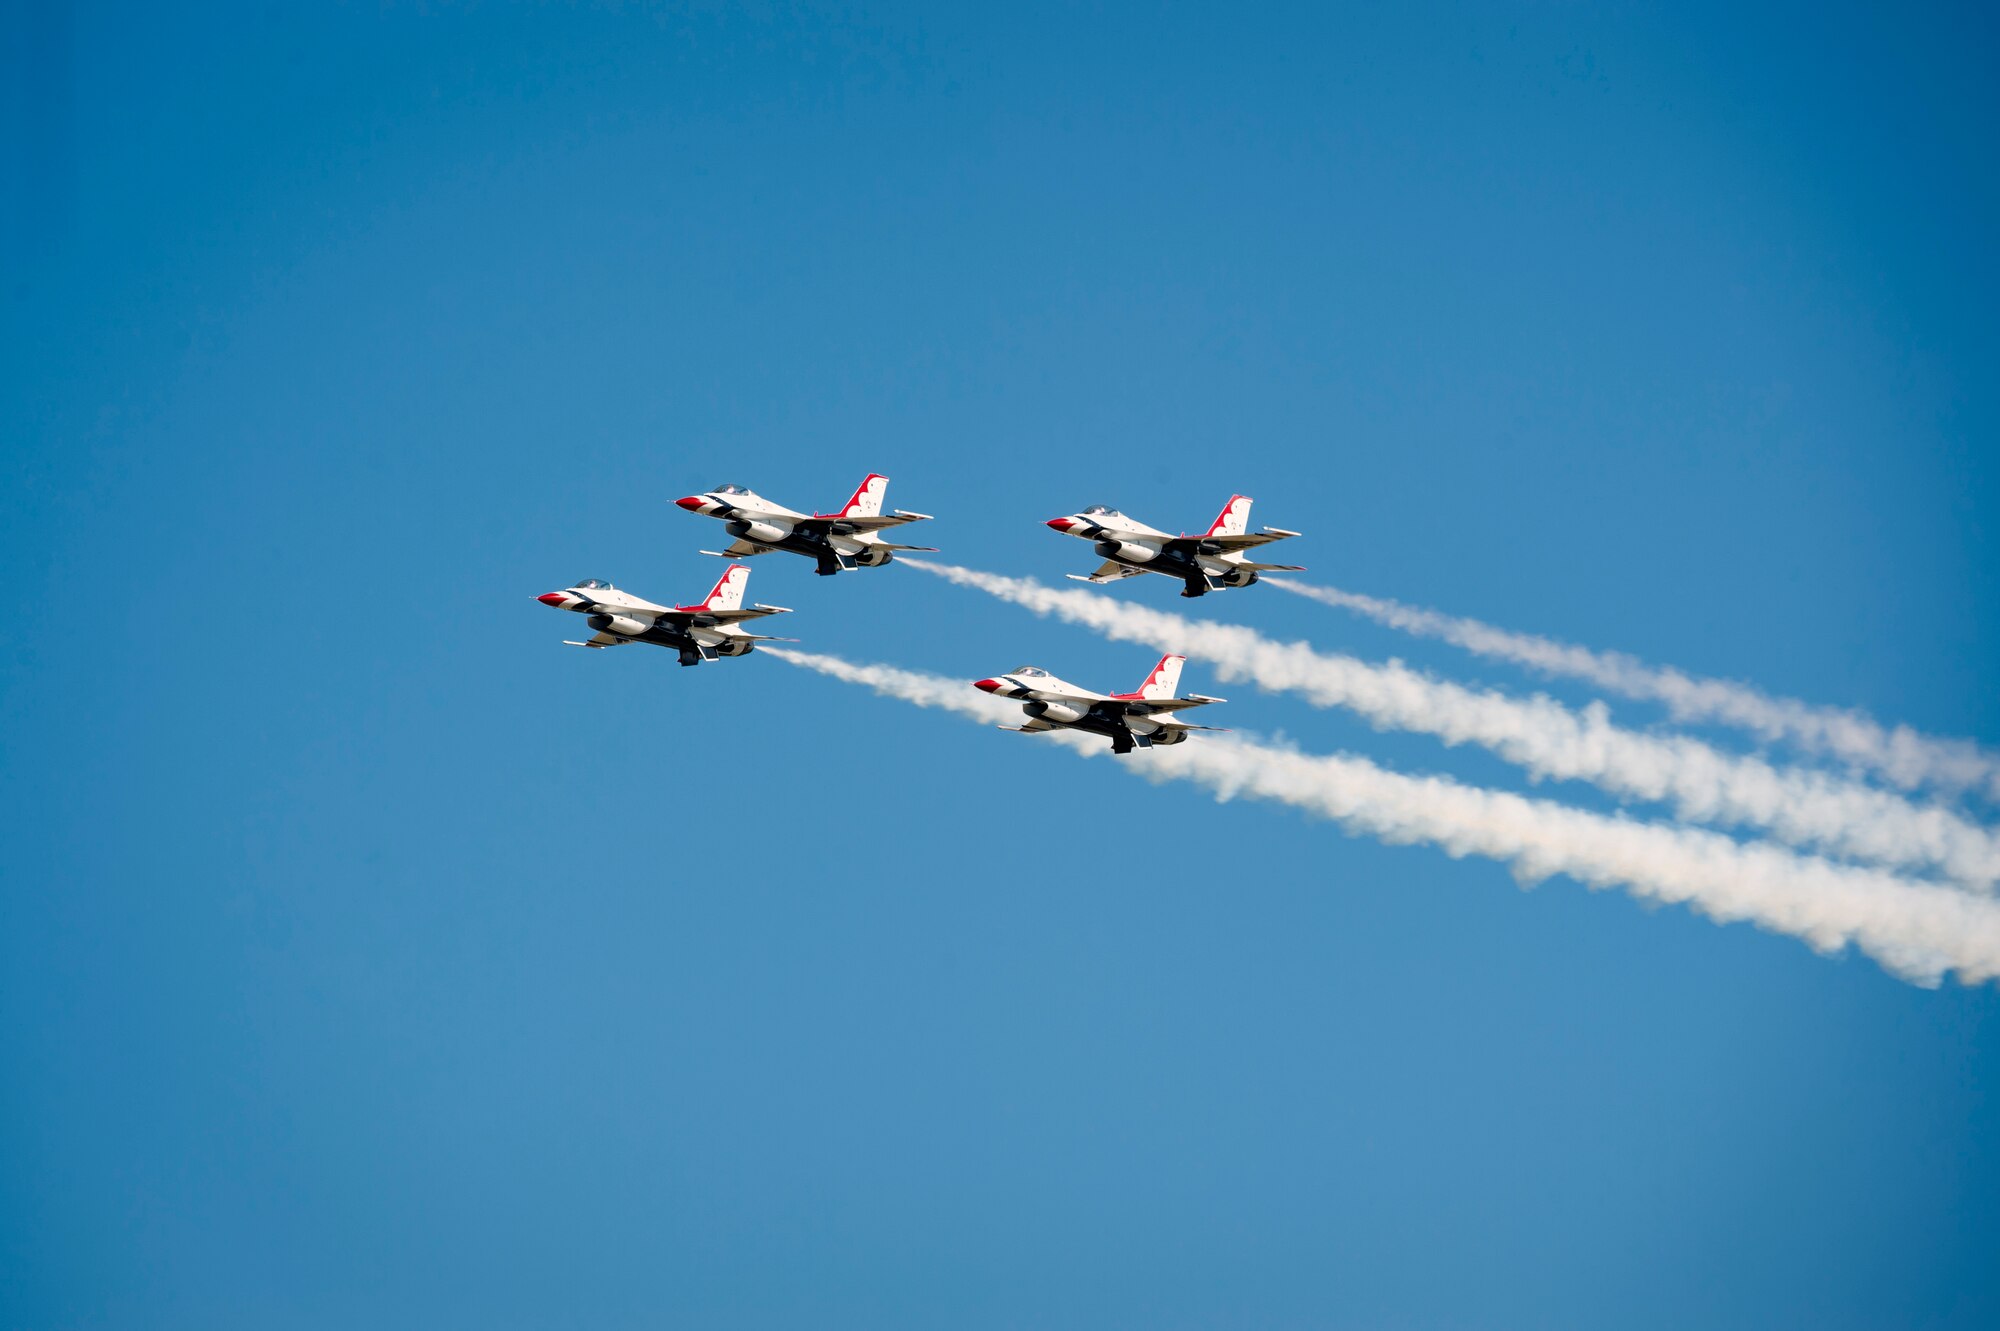 The U.S. Air Force Thunderbirds Flight Demonstration Team soars above the Moody flightline during the Thunder Over South Georgia Air Show, Oct. 29, 2017, at Moody Air Force Base, Ga. The Thunderbirds, based out of Nellis Air Force Base, Nev., are the Air Force’s premier aerial demonstration team, performing at air shows and special events worldwide. (U.S. Air Force photo by Senior Airman Greg Nash)